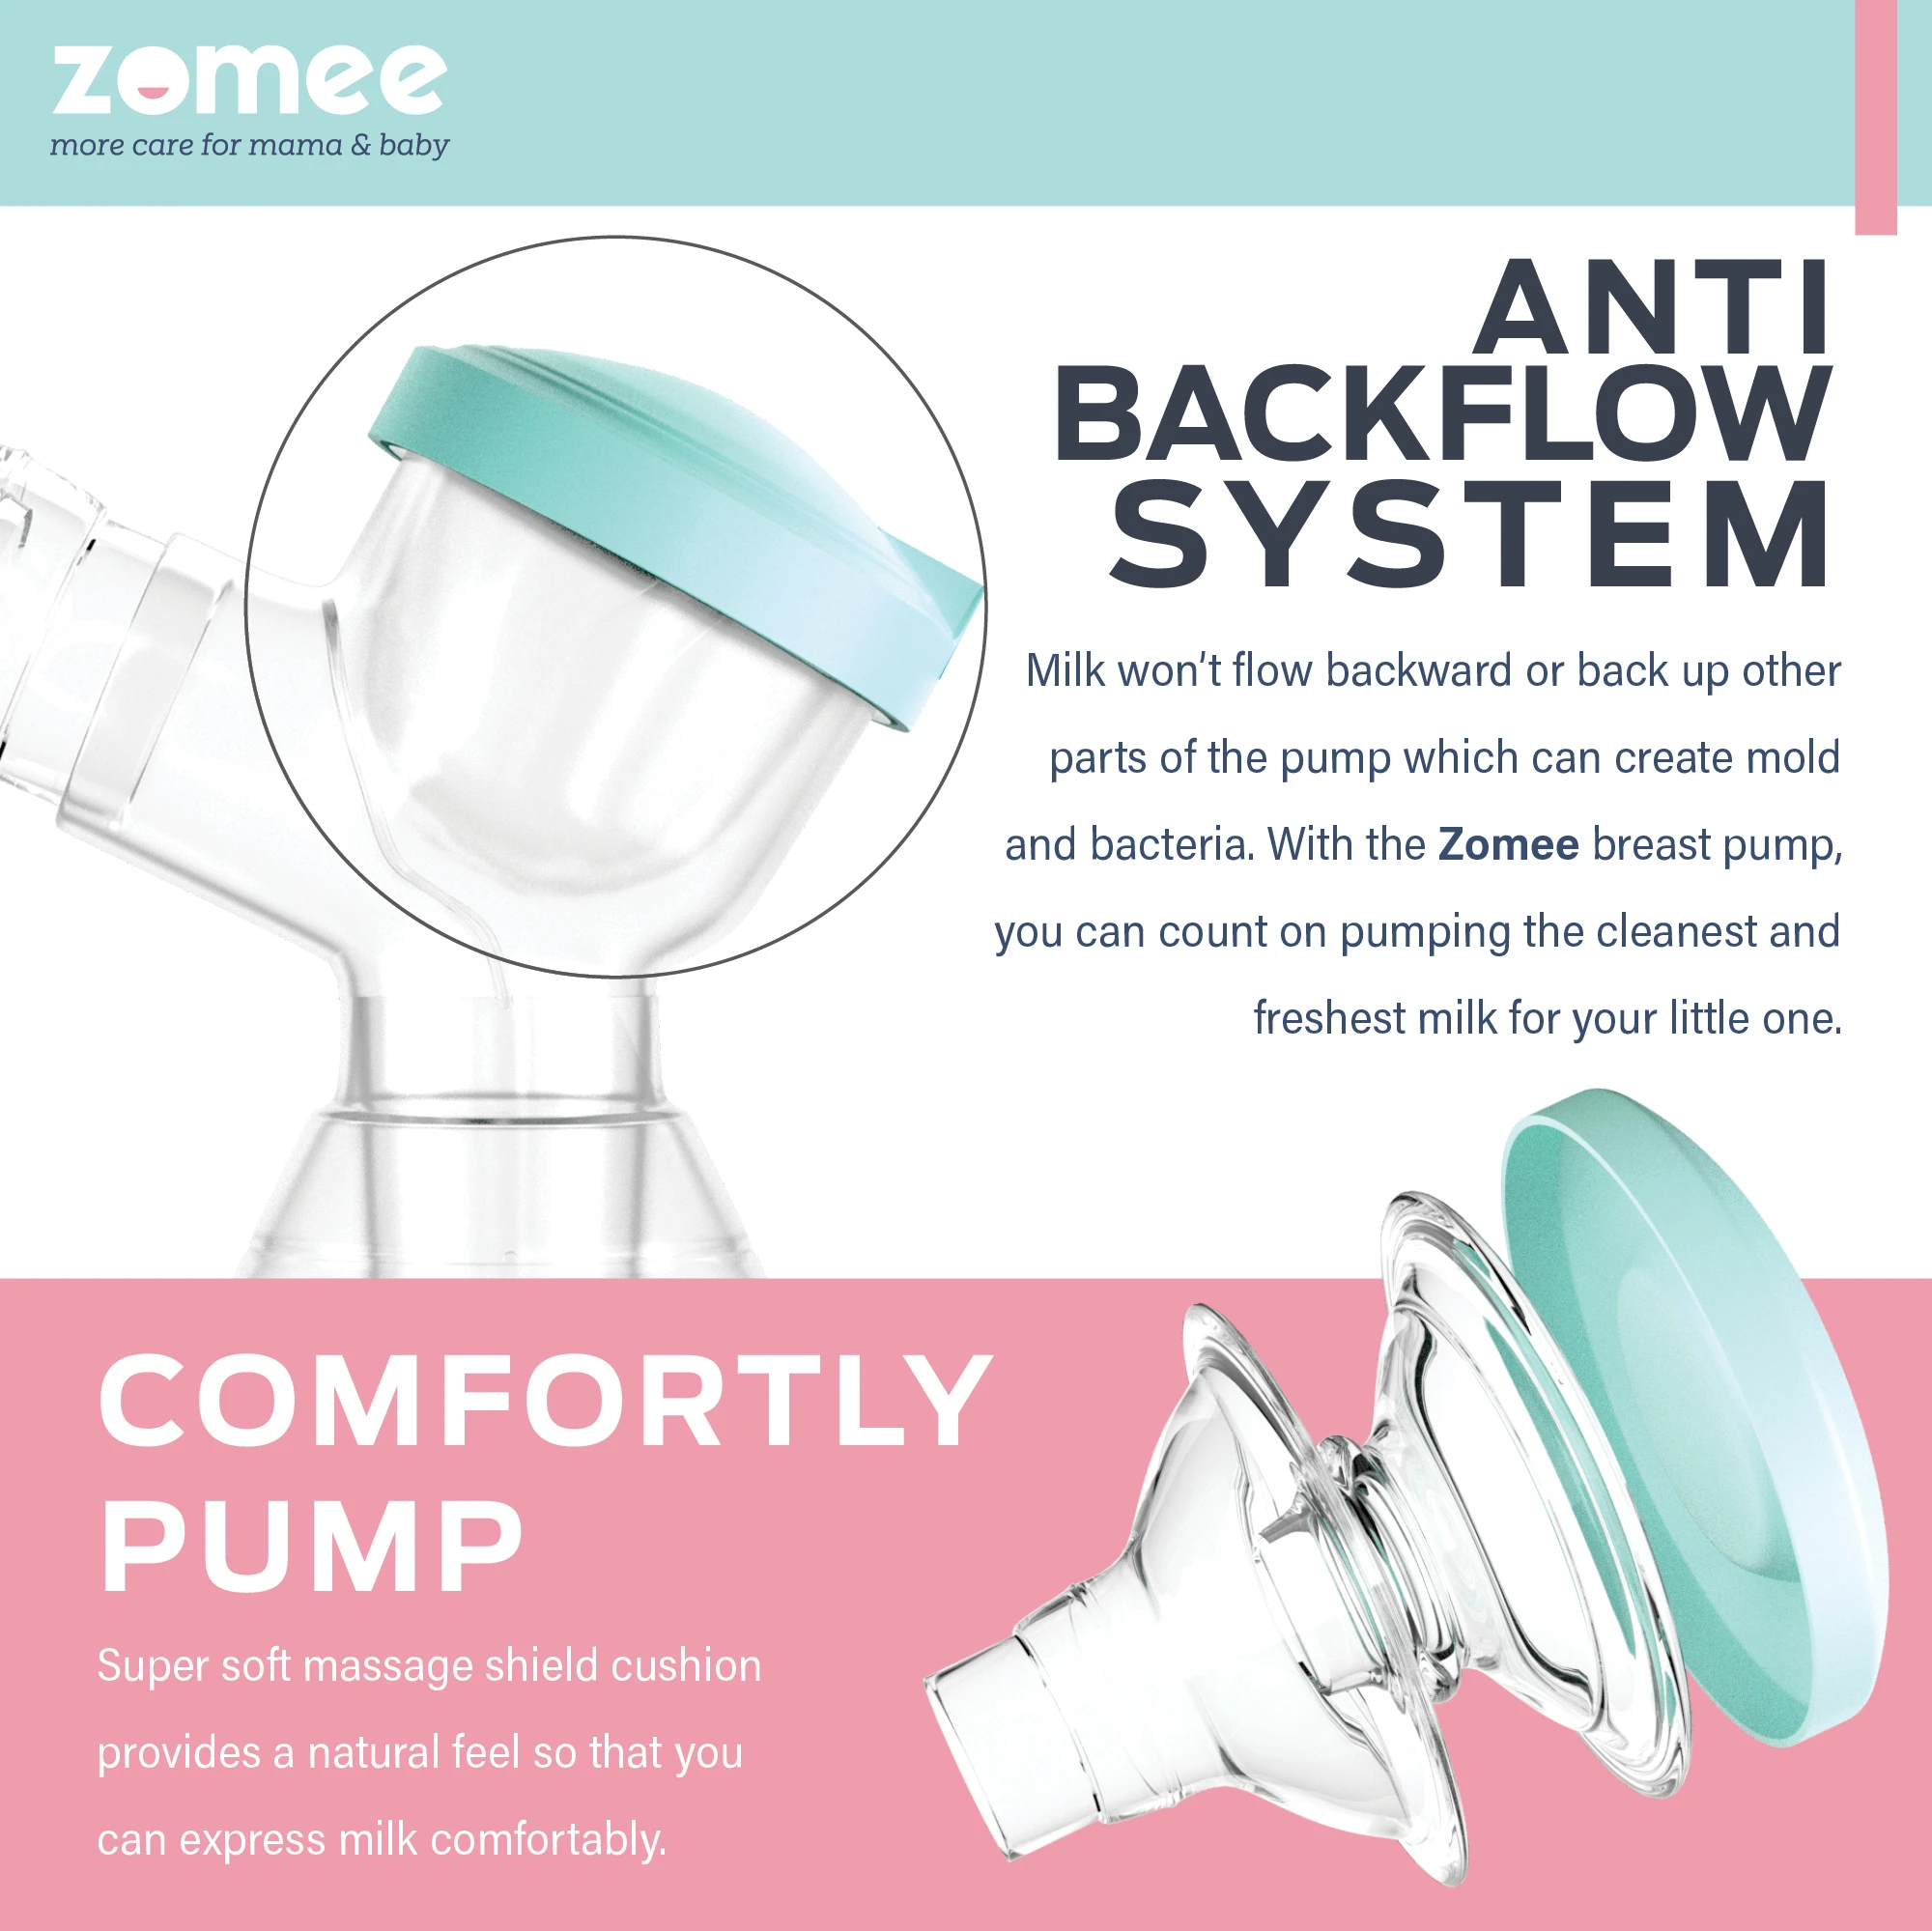 Zomee breast pump infographic